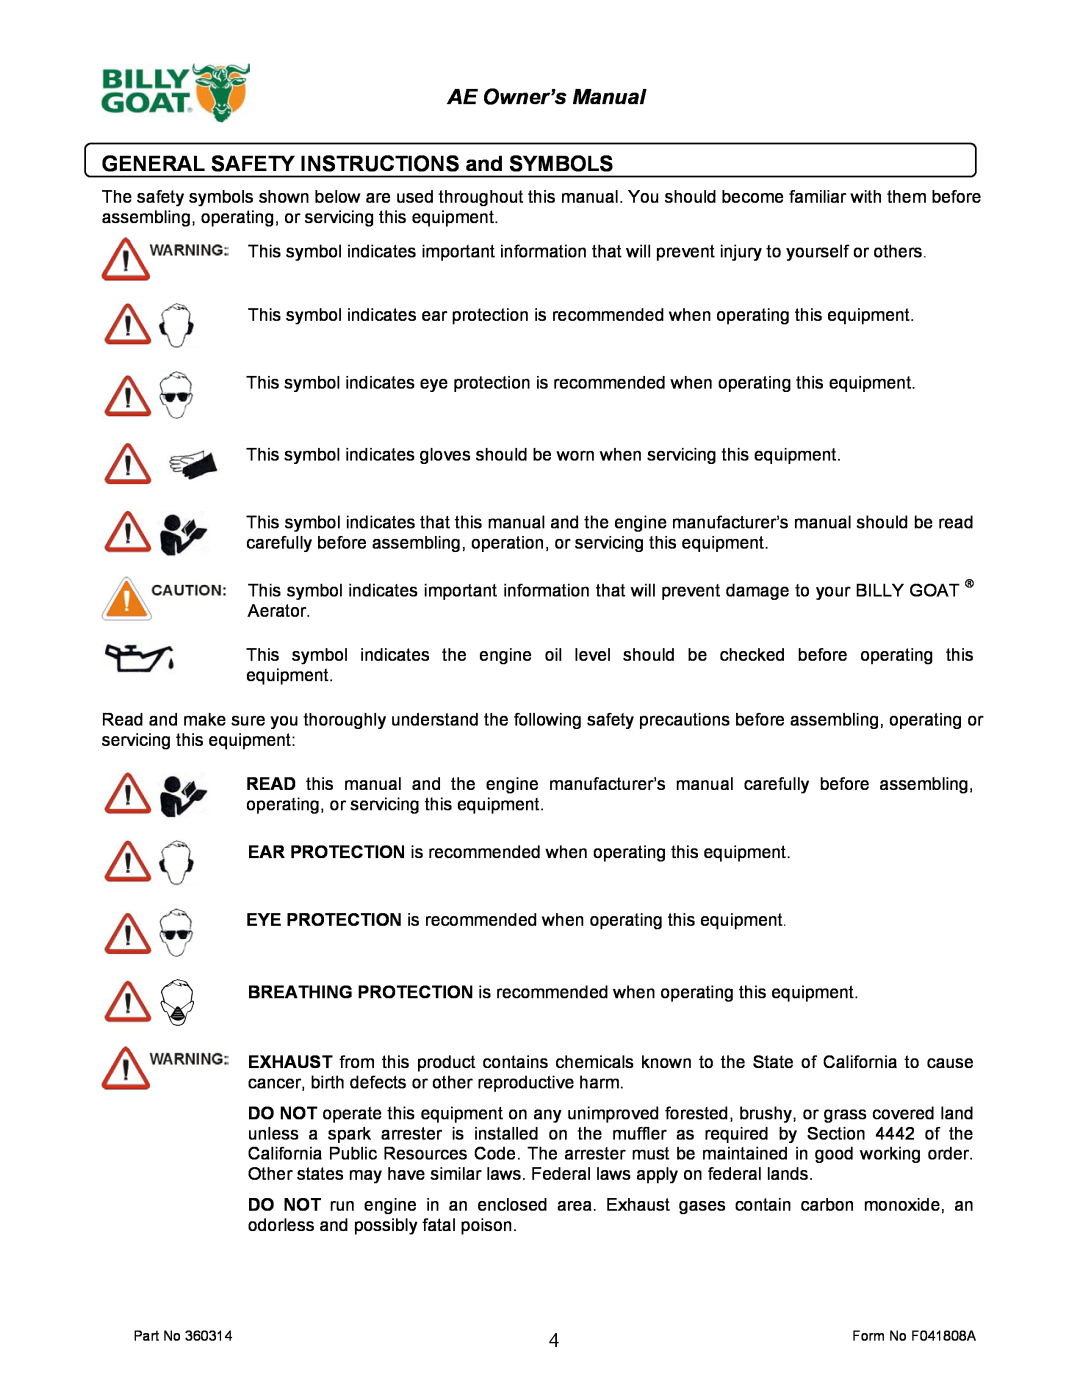 Billy Goat AE401H5T owner manual GENERAL SAFETY INSTRUCTIONS and SYMBOLS 